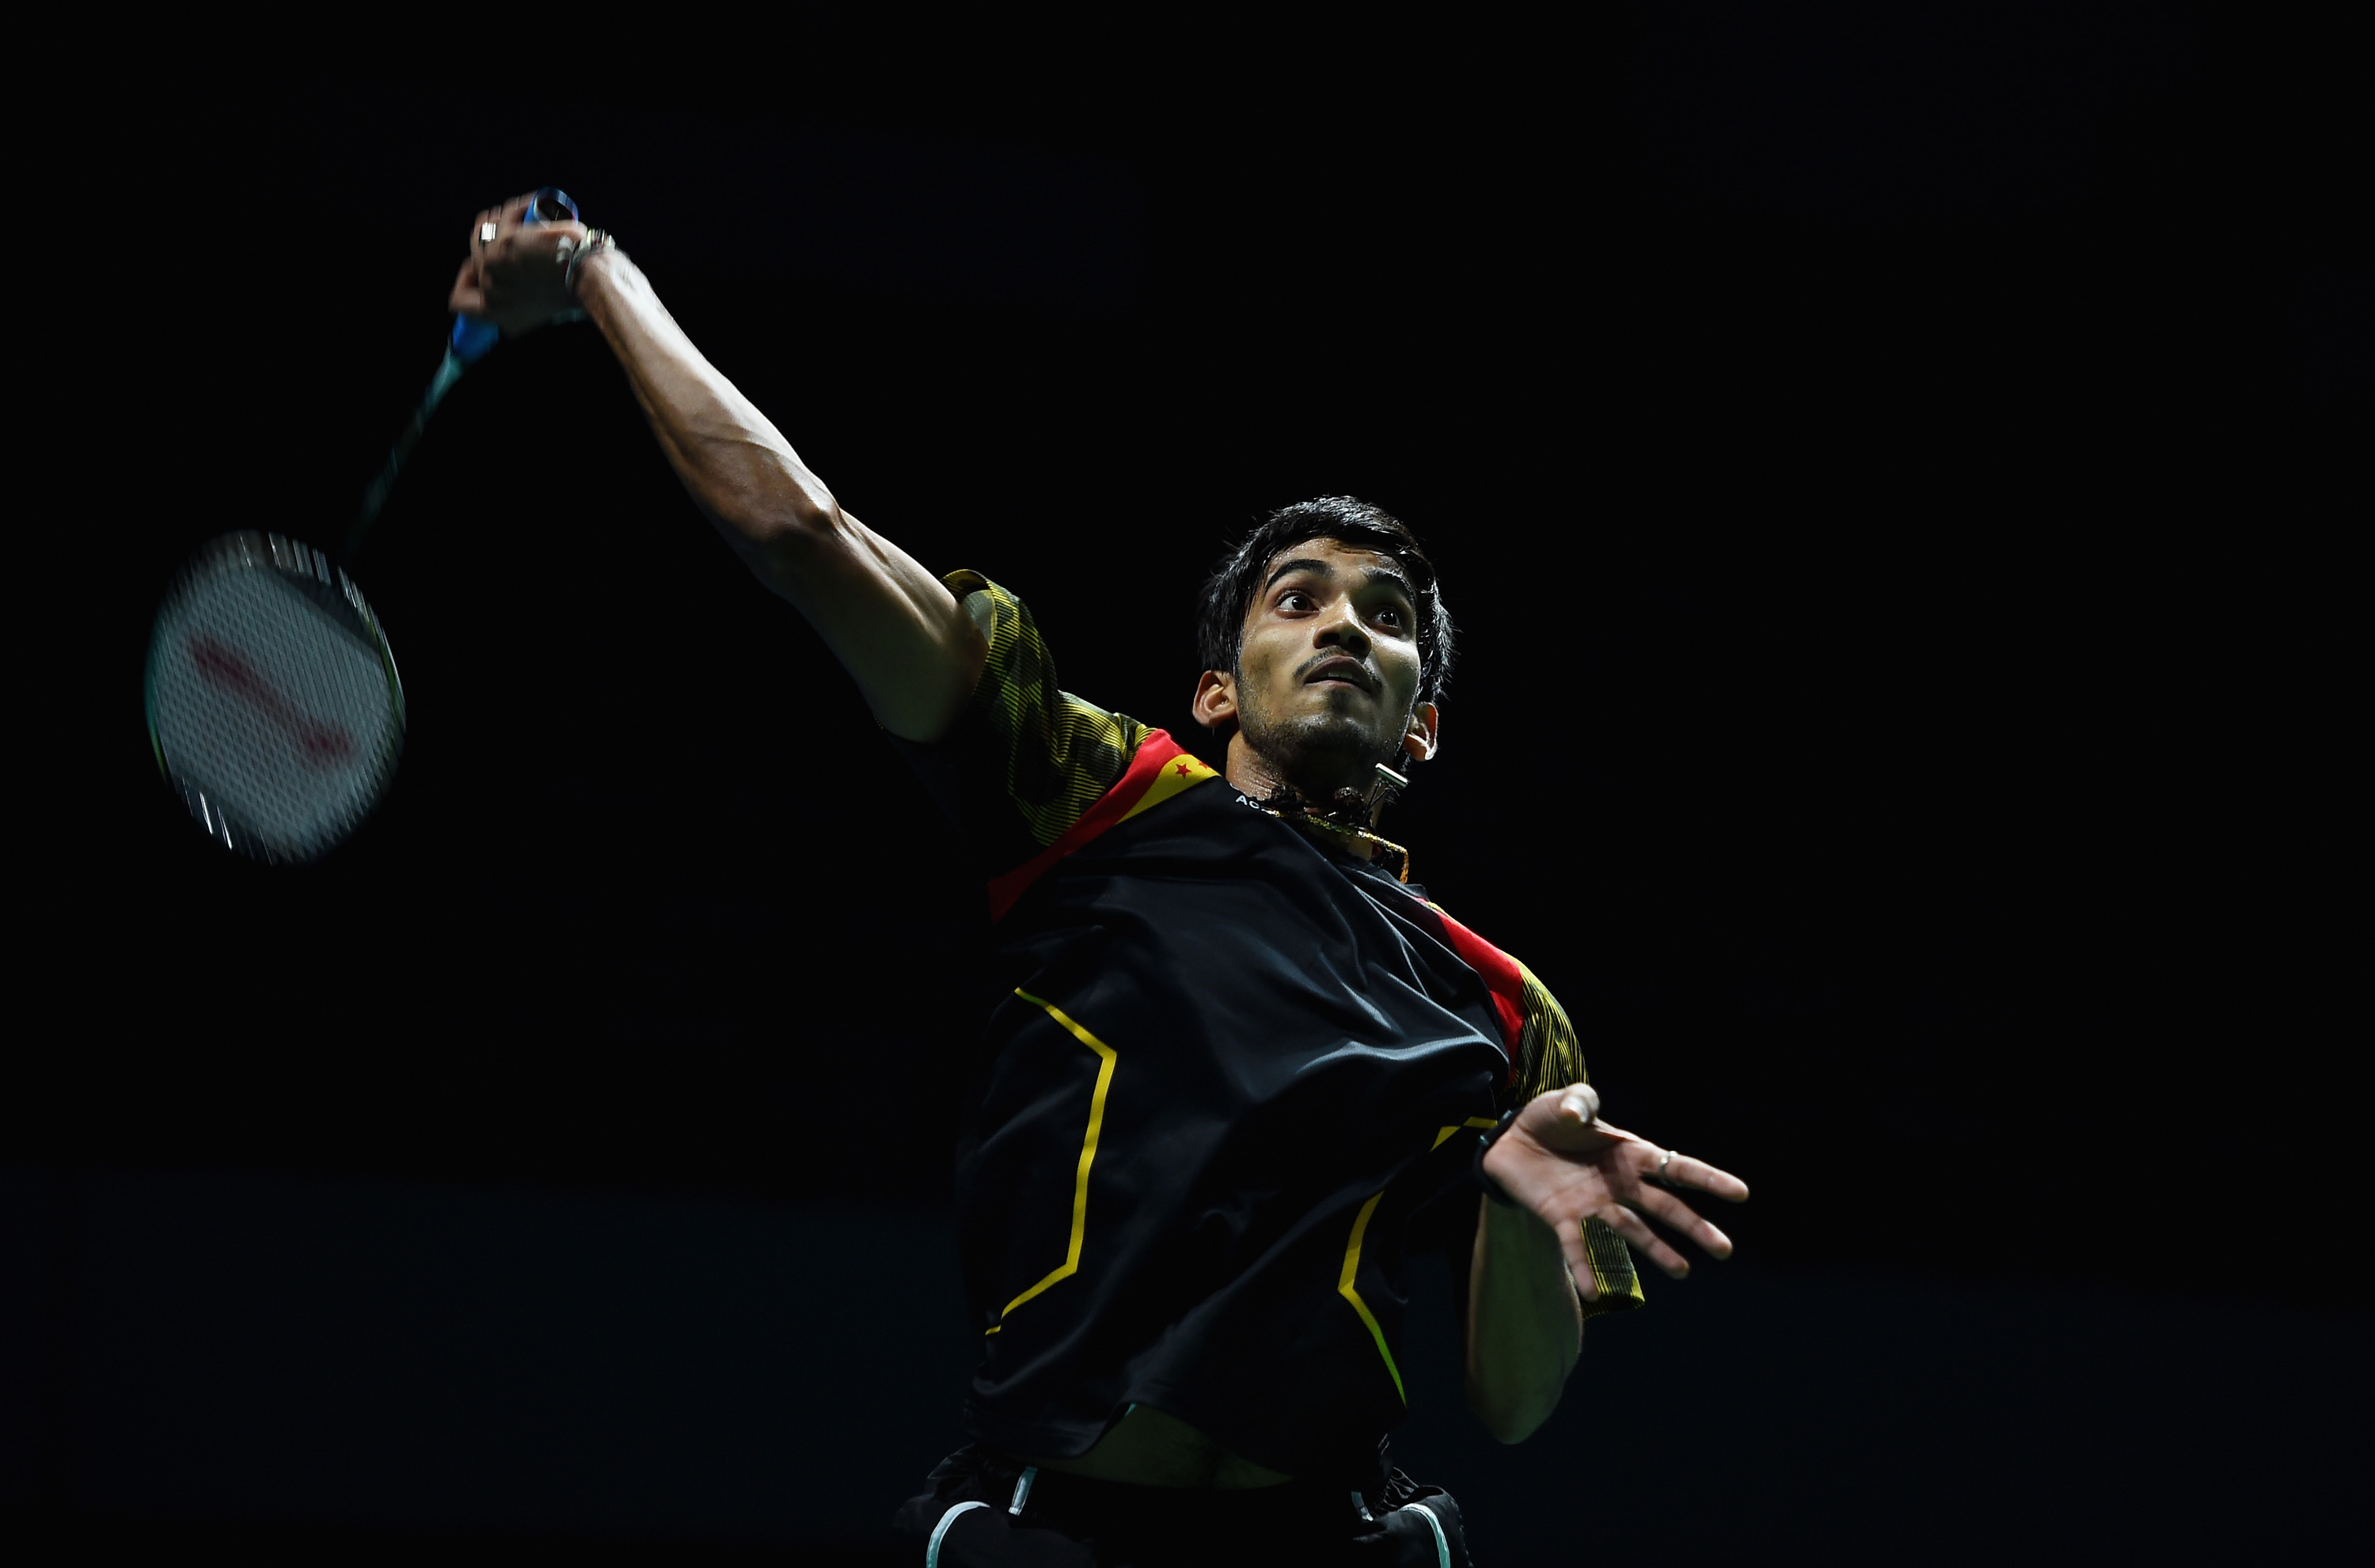 Singapore Open 2017 | Sindhu and Praneeth struggle into second round while Srikanth cruises